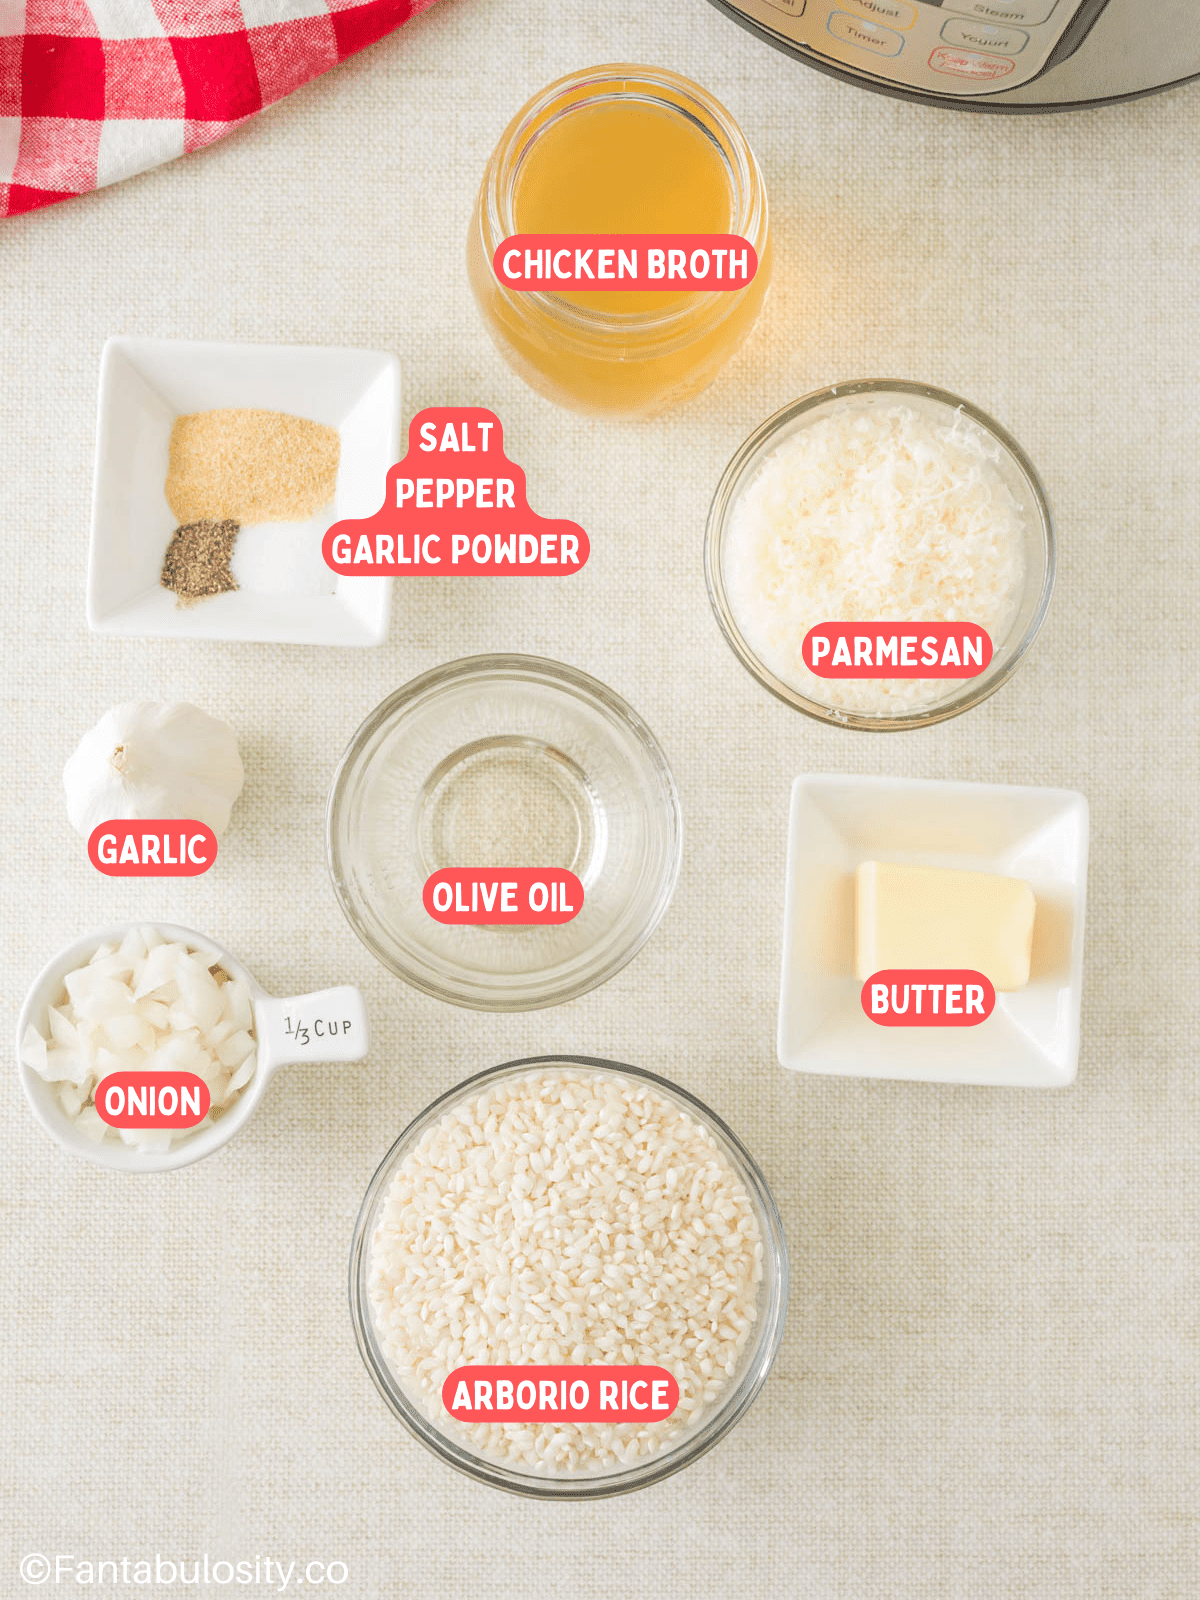 Instant Pot parmesan risotto ingredients with labels on the image. 